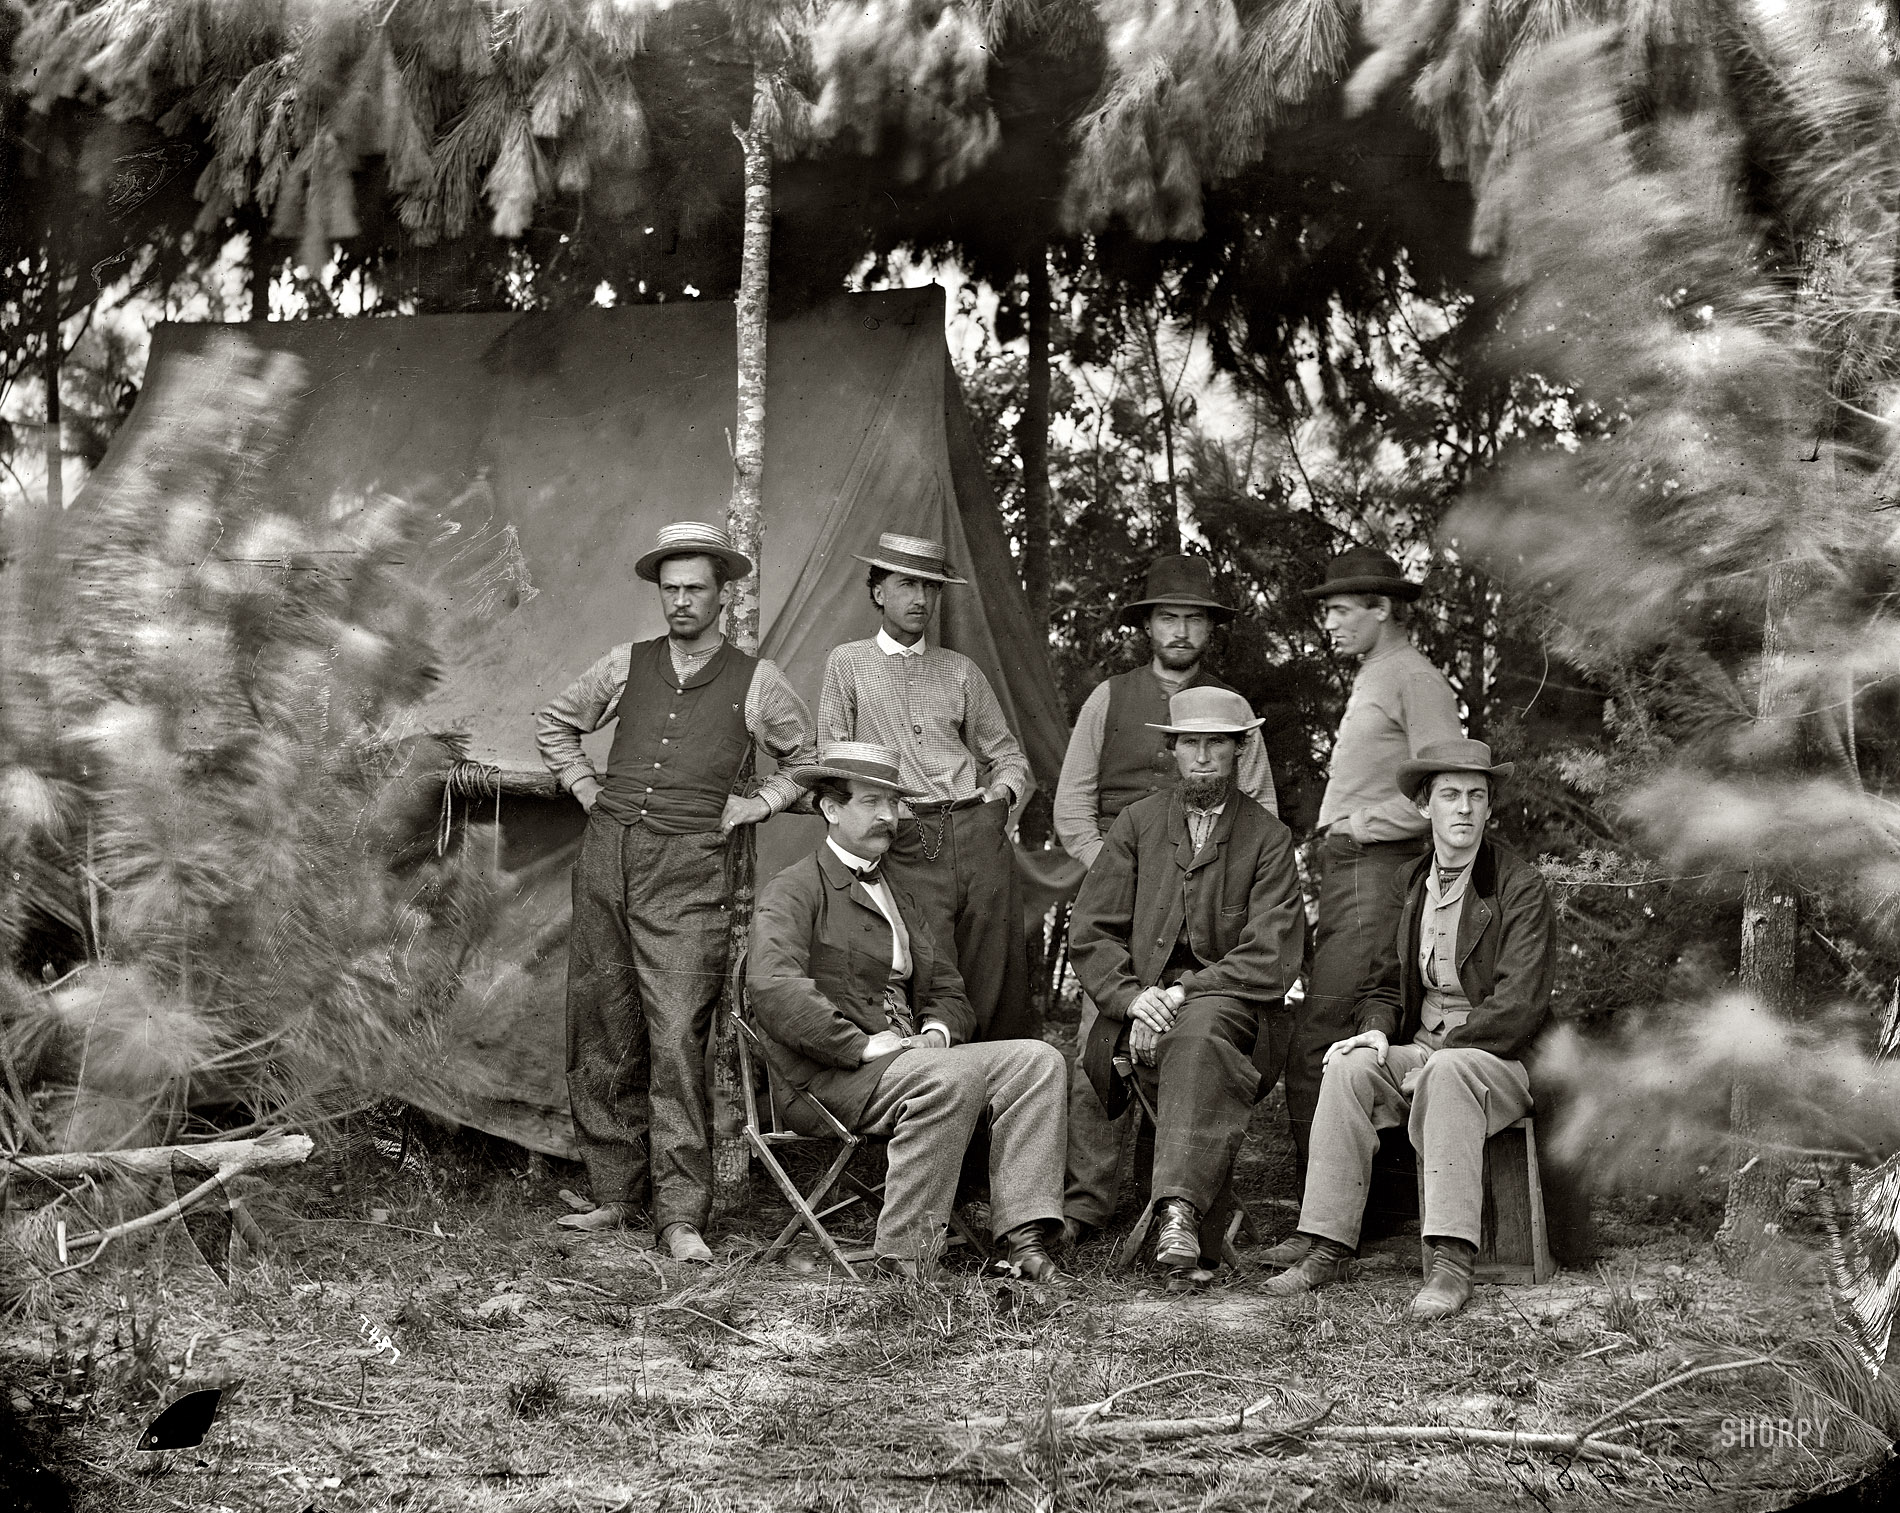 1864. Petersburg, Virginia. "Maj. Thomas T. Eckert (seated, left) and others of U.S. Military Telegraph Corps." Wet plate glass negative. View full size.